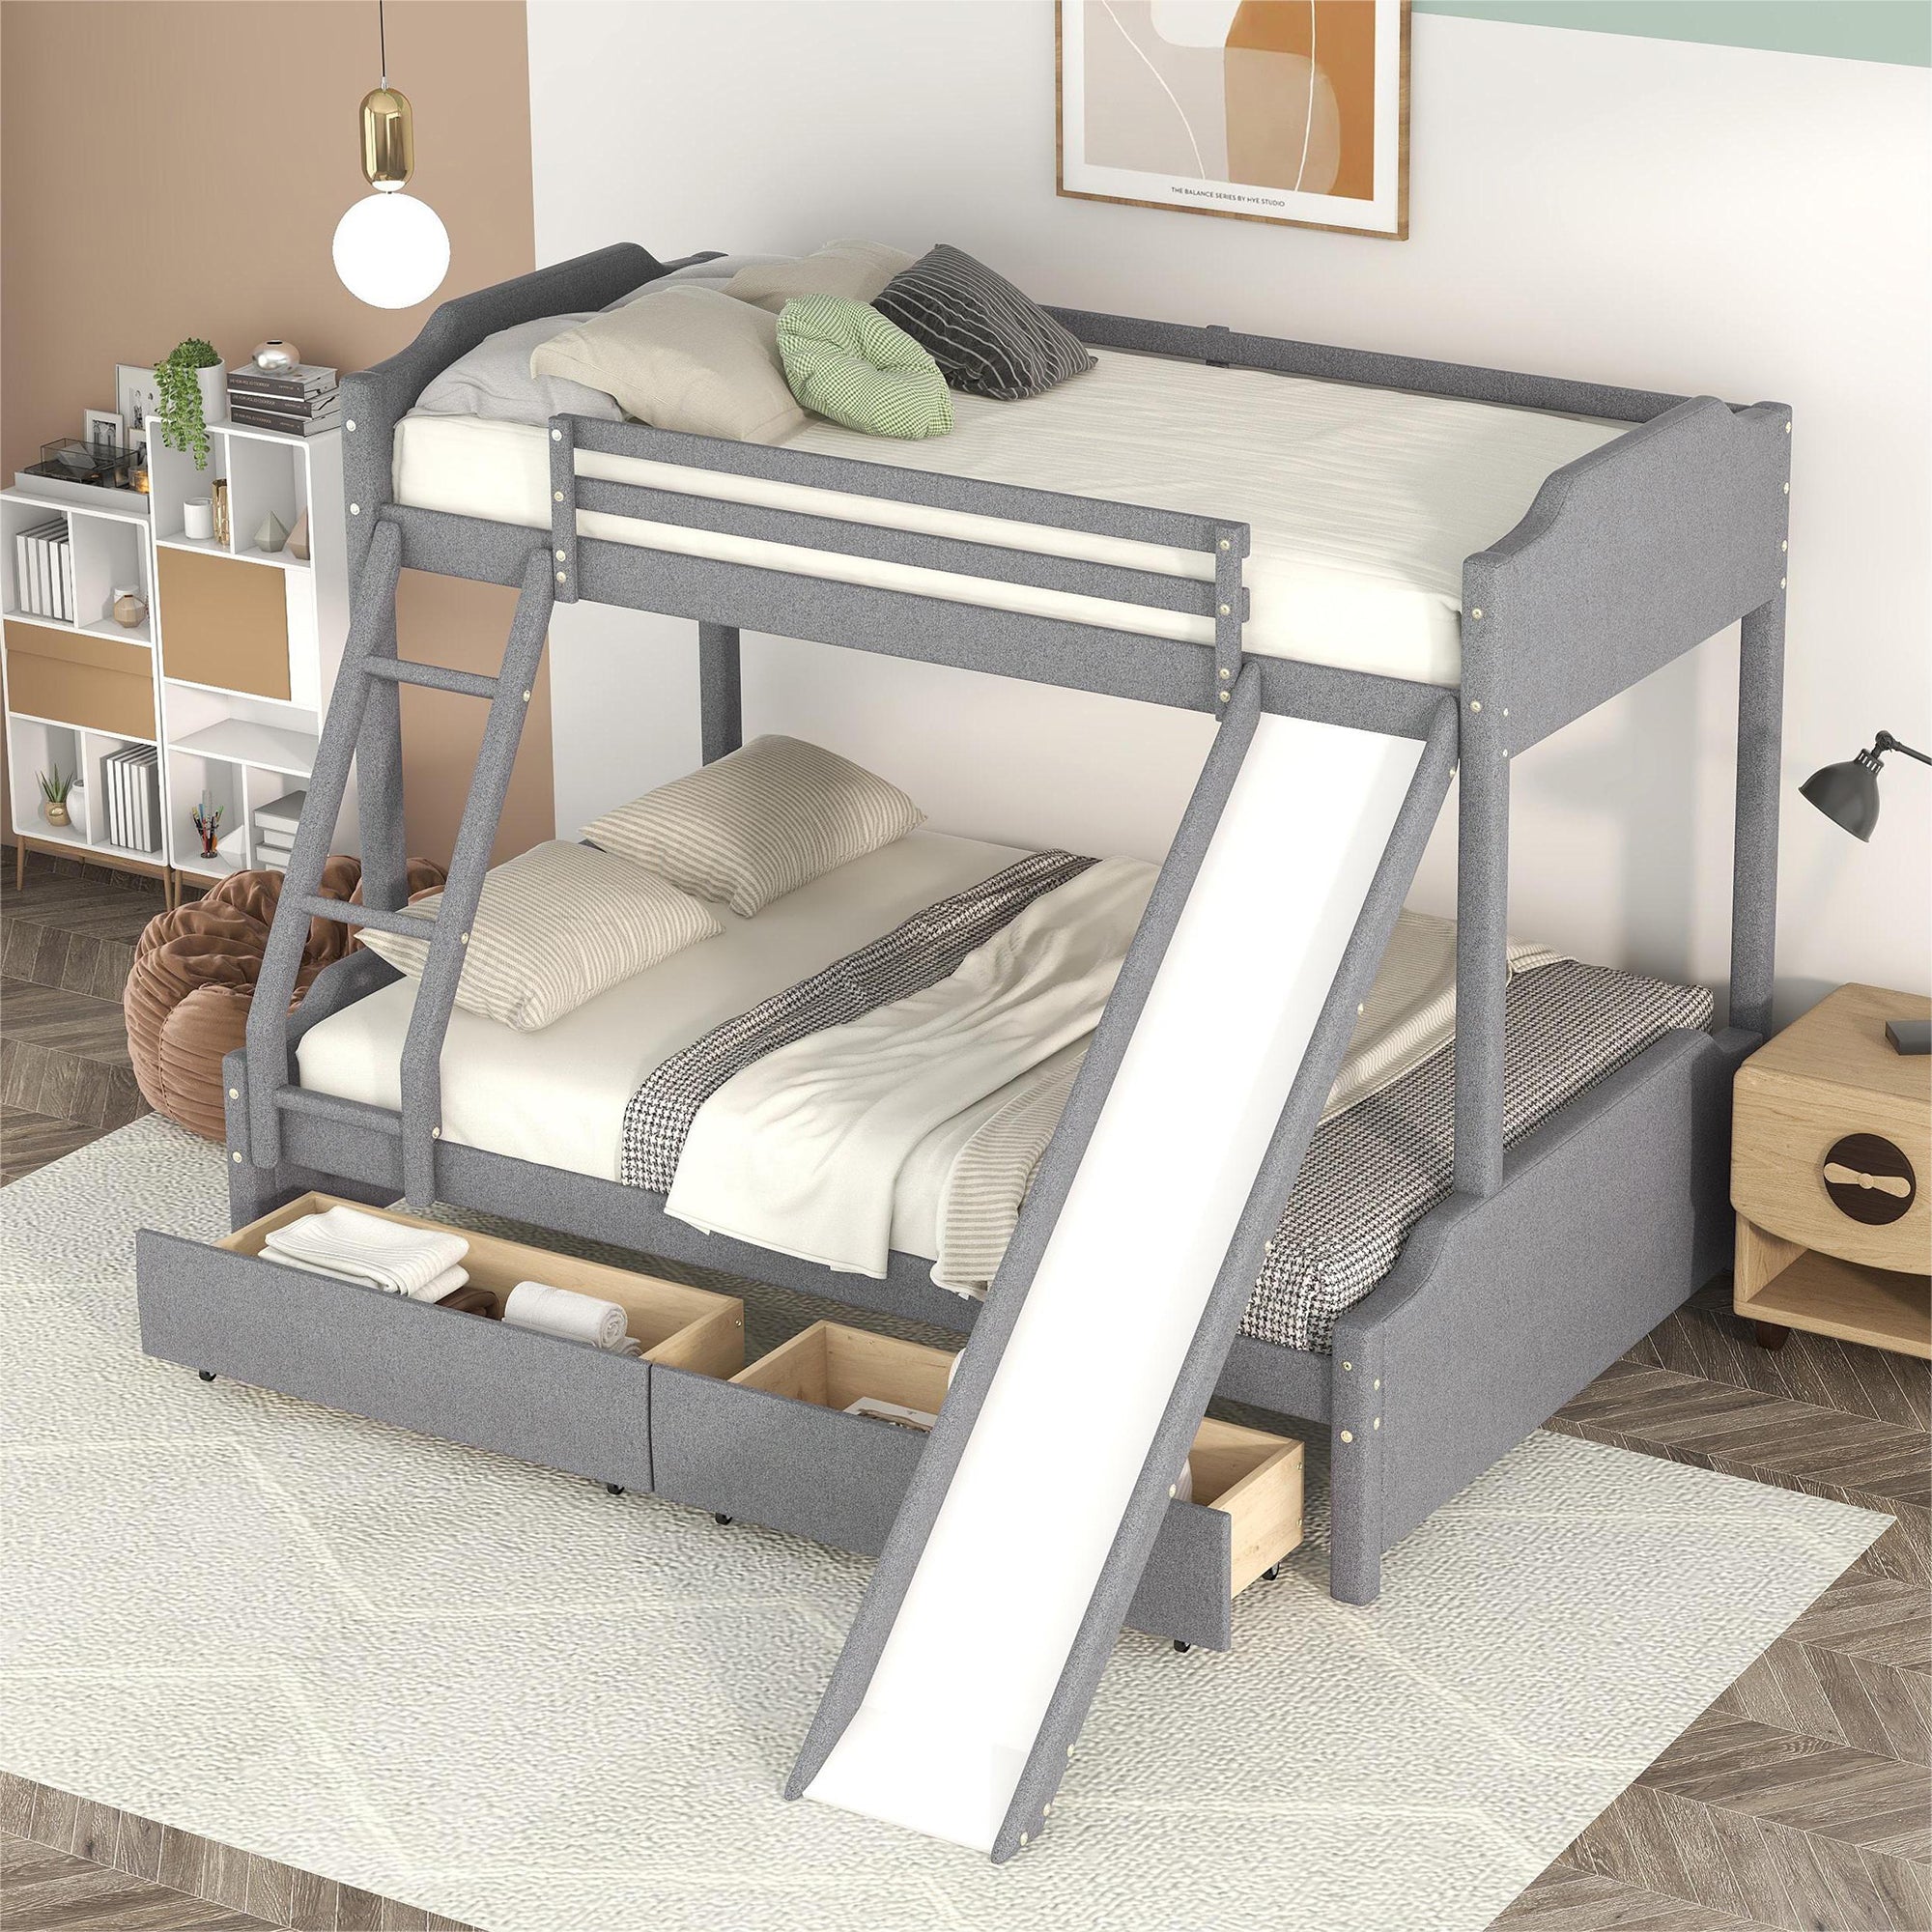 EUROCO Upholstery Twin over Full Bunk Bed with Slide and Drawers for Kids Room, Gray